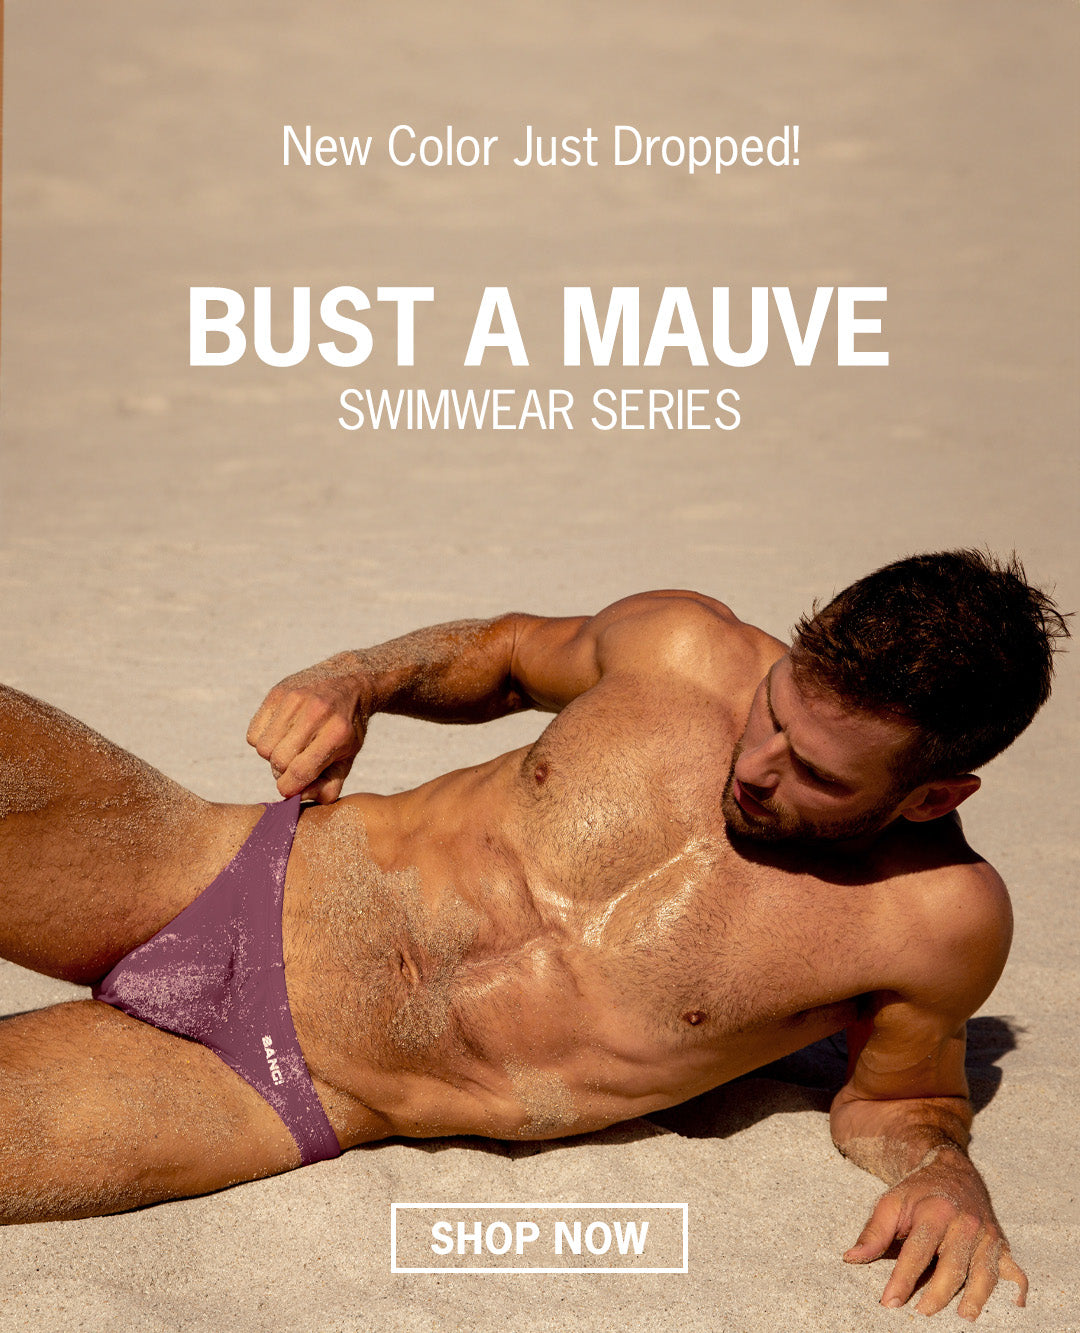 The BUST A MAUVE swimwear series by BANG! Miami, featuring light mauve purple color in all men's swimsuit silhouettes.